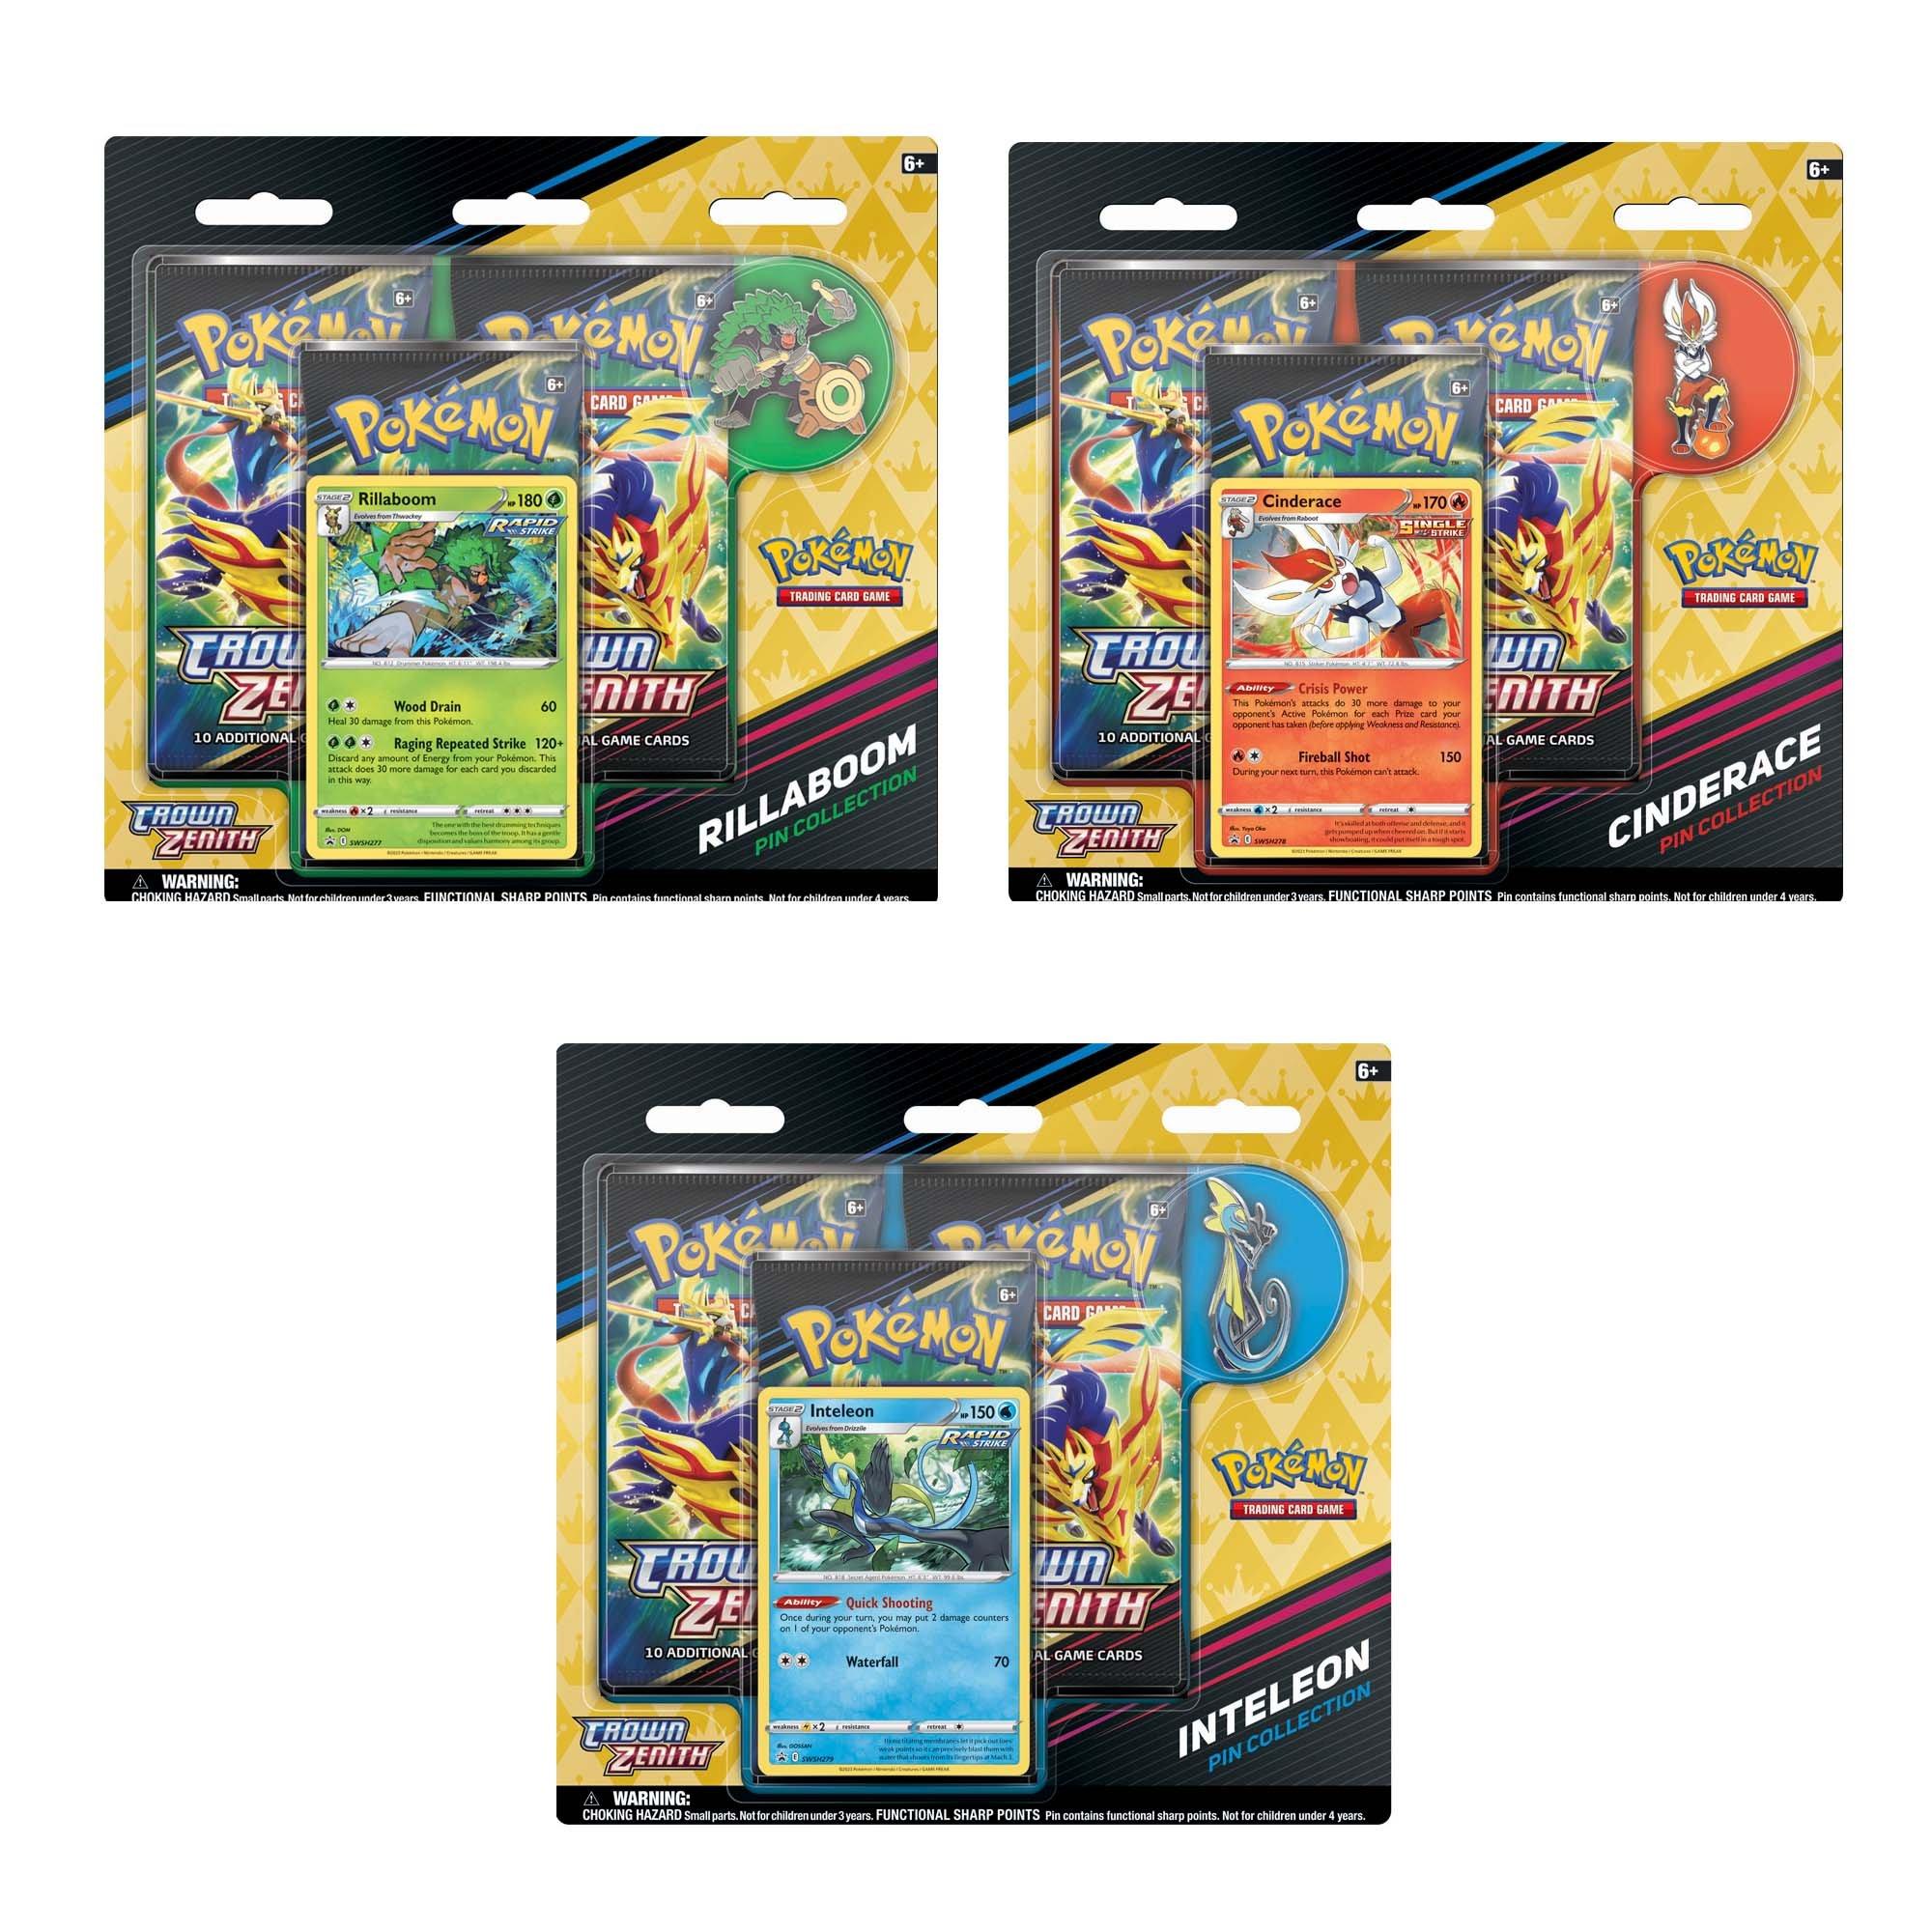 Pokemon Trading Card Game: Crown Zenith Pin Collection (Styles May Vary)